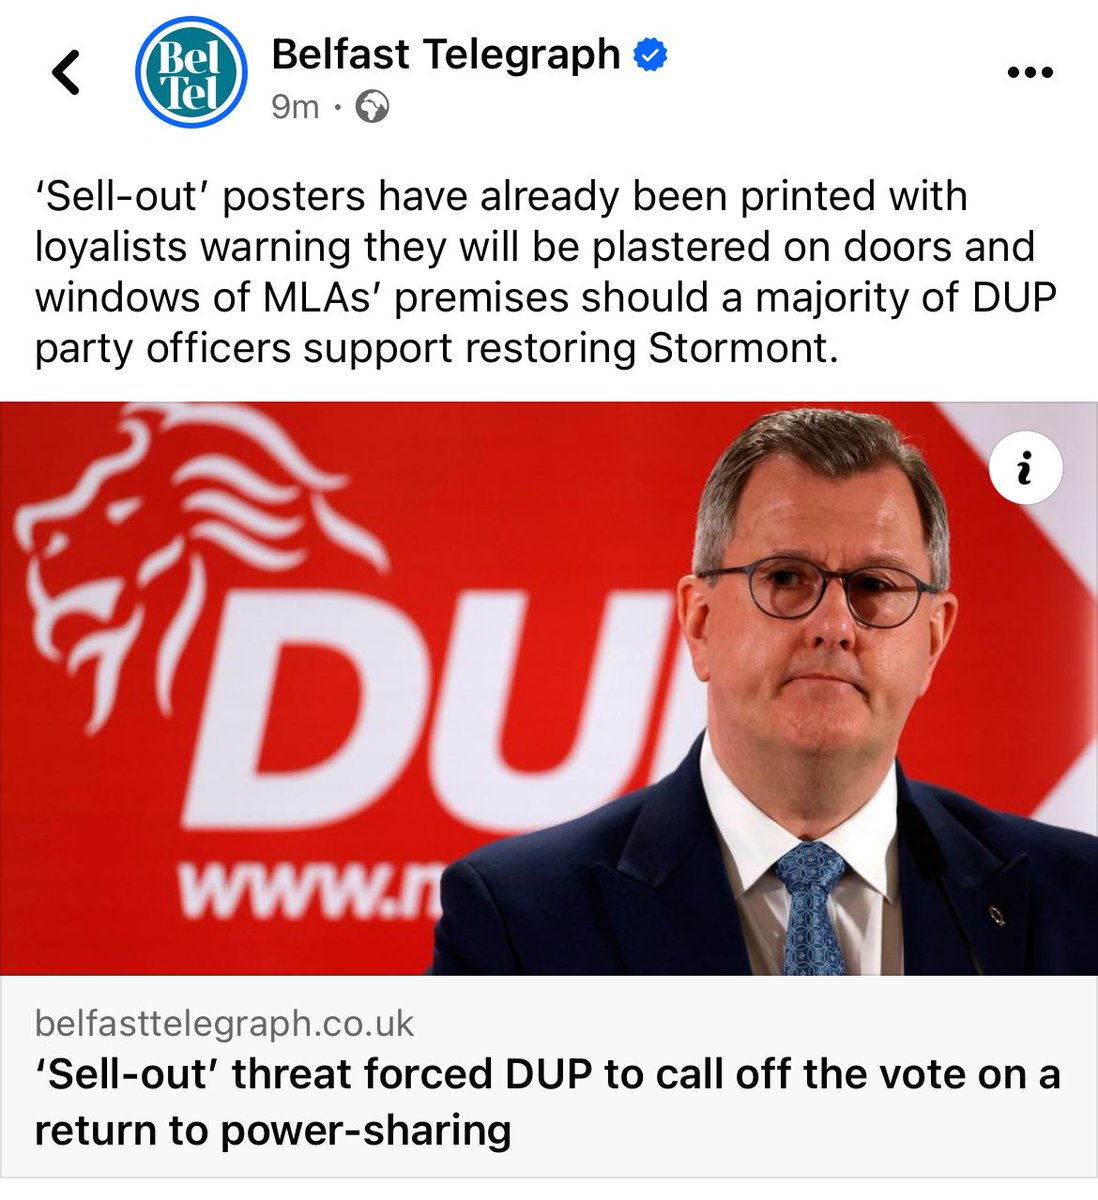 Unionism is ripping itself apart drug dealers and terrorists are calling the shots. Any man with a bit of sense can see this carry on won’t end well. Unionism is dying a slow death.